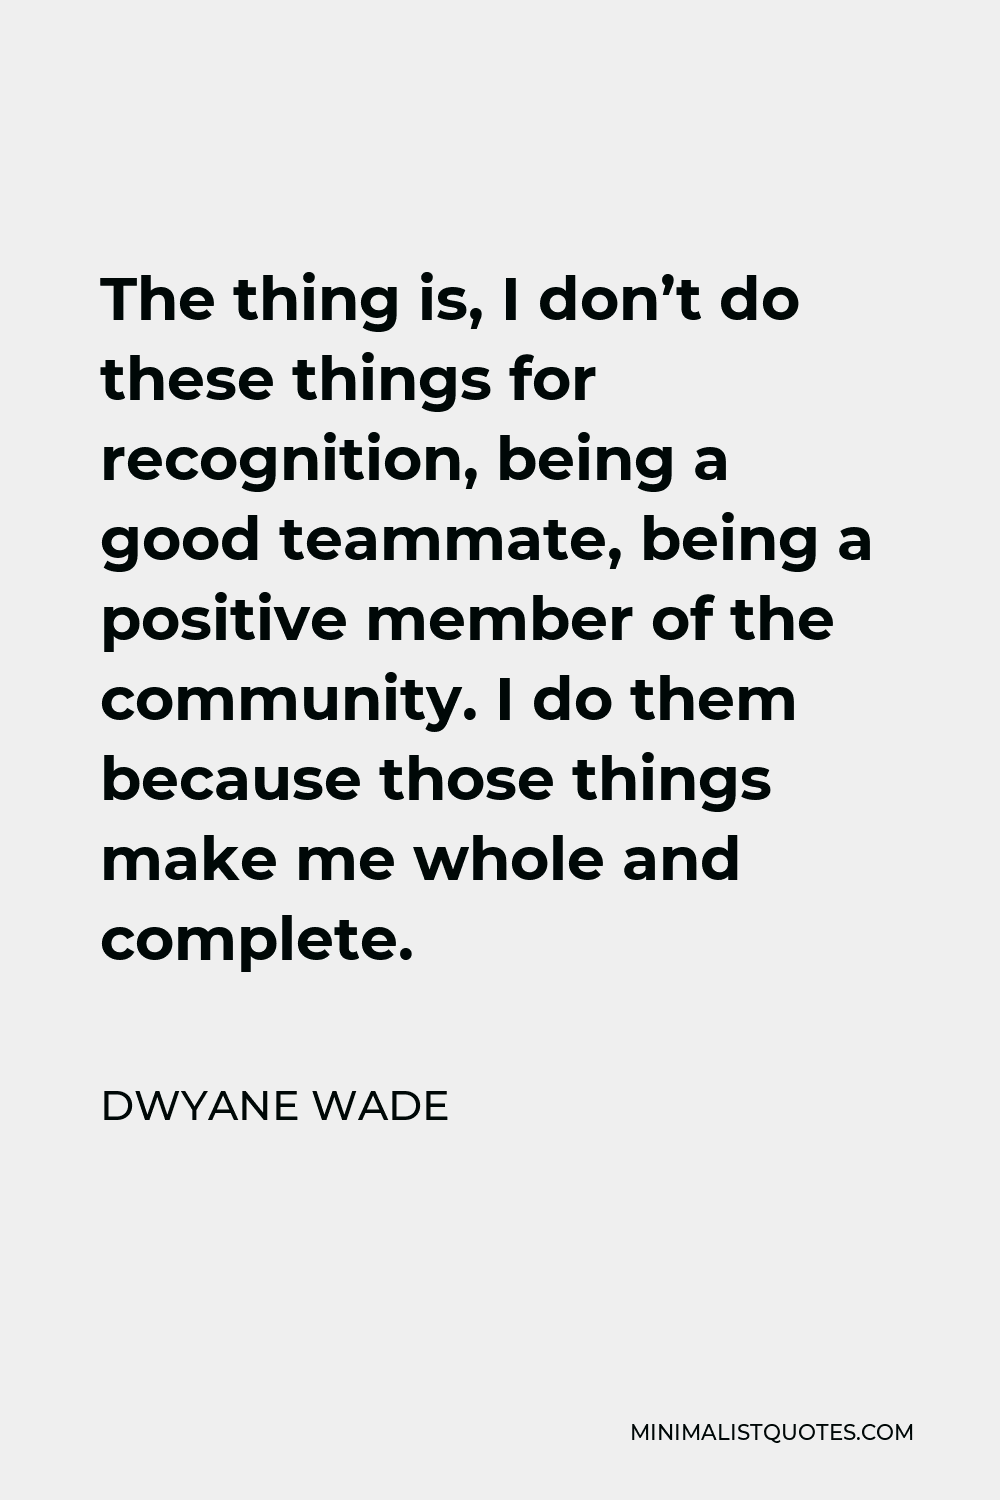 Dwyane Wade Quote - The thing is, I don’t do these things for recognition, being a good teammate, being a positive member of the community. I do them because those things make me whole and complete.